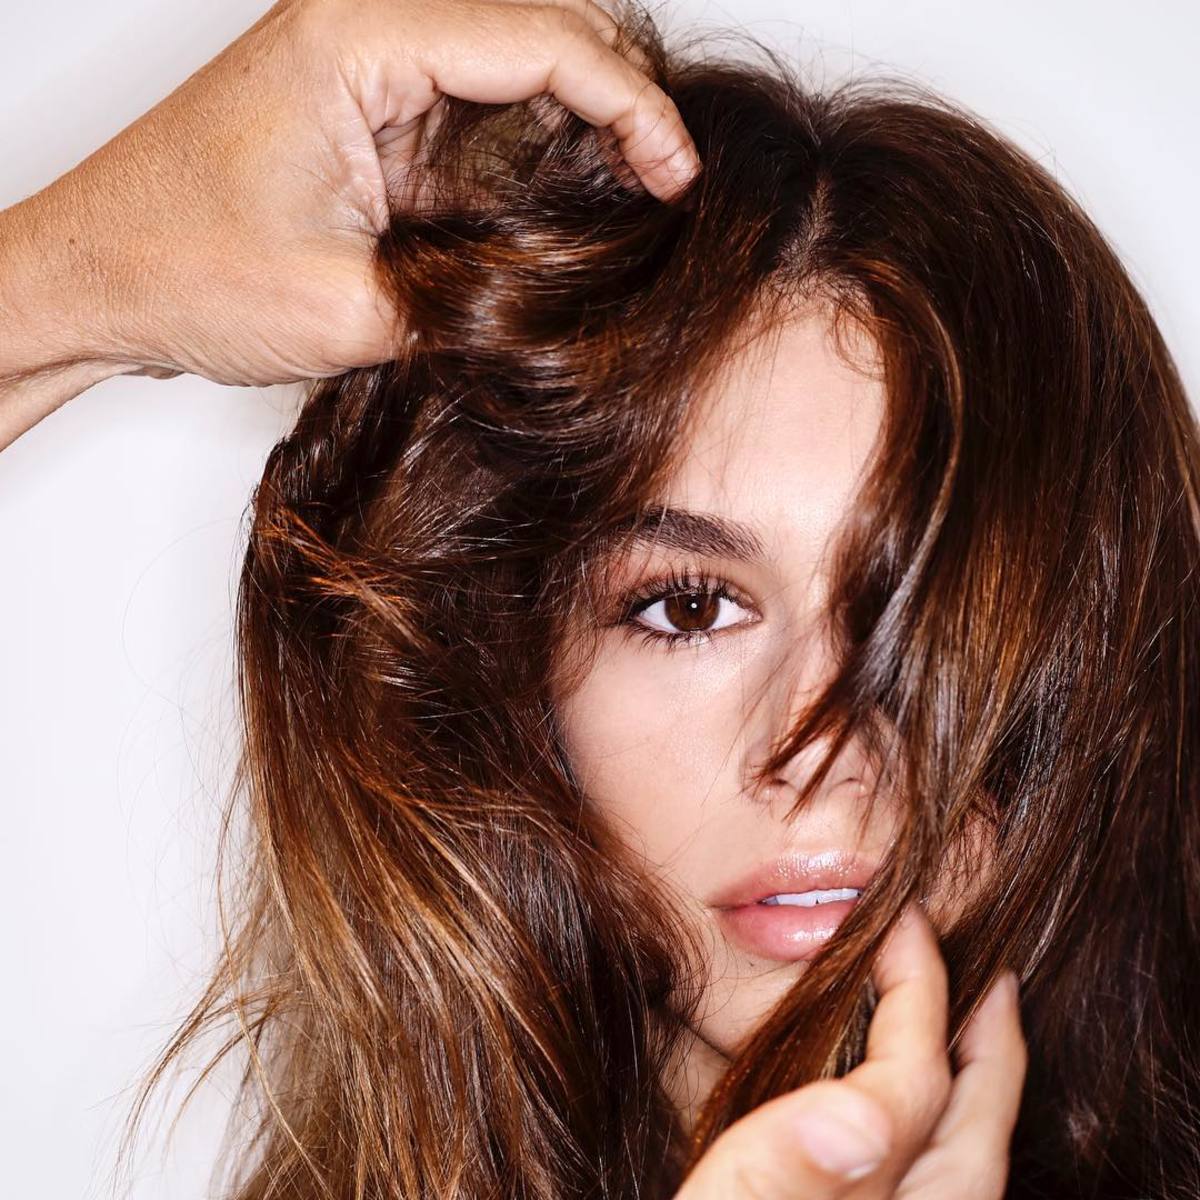 Palau's work (and hands) on Kaia Gerber backstage at the Alexander Wang Spring 2018 show. Photo: @guidopalau/Instagram